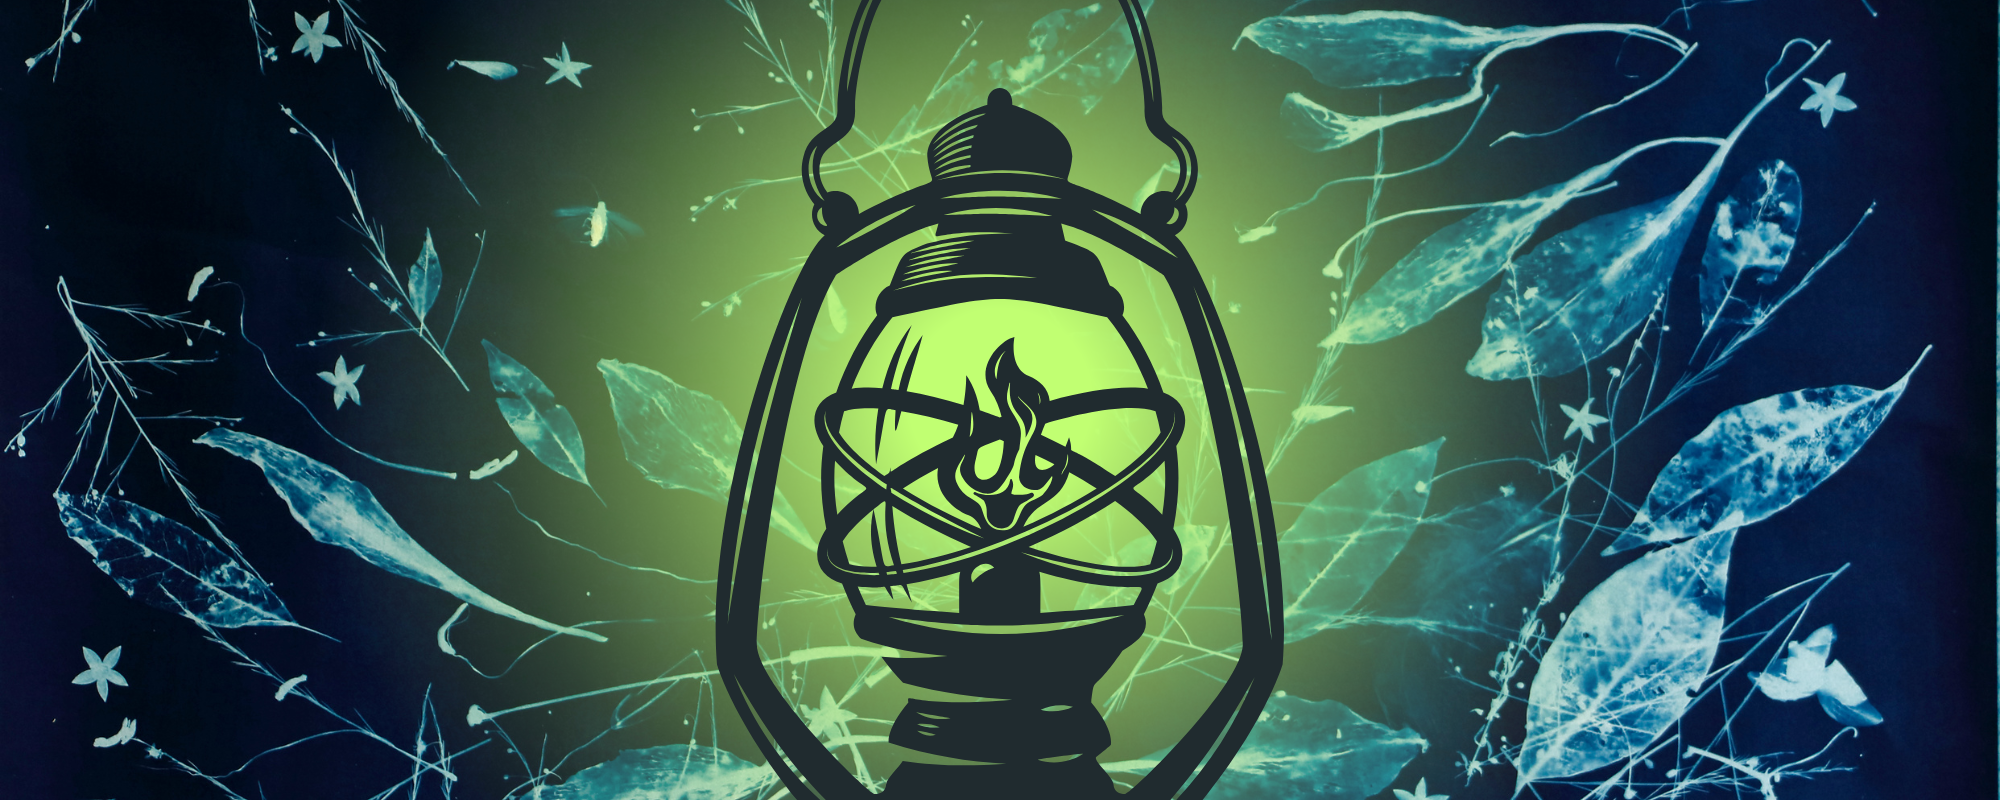 Graphic of a bright glowing lantern in colors of blue and green.